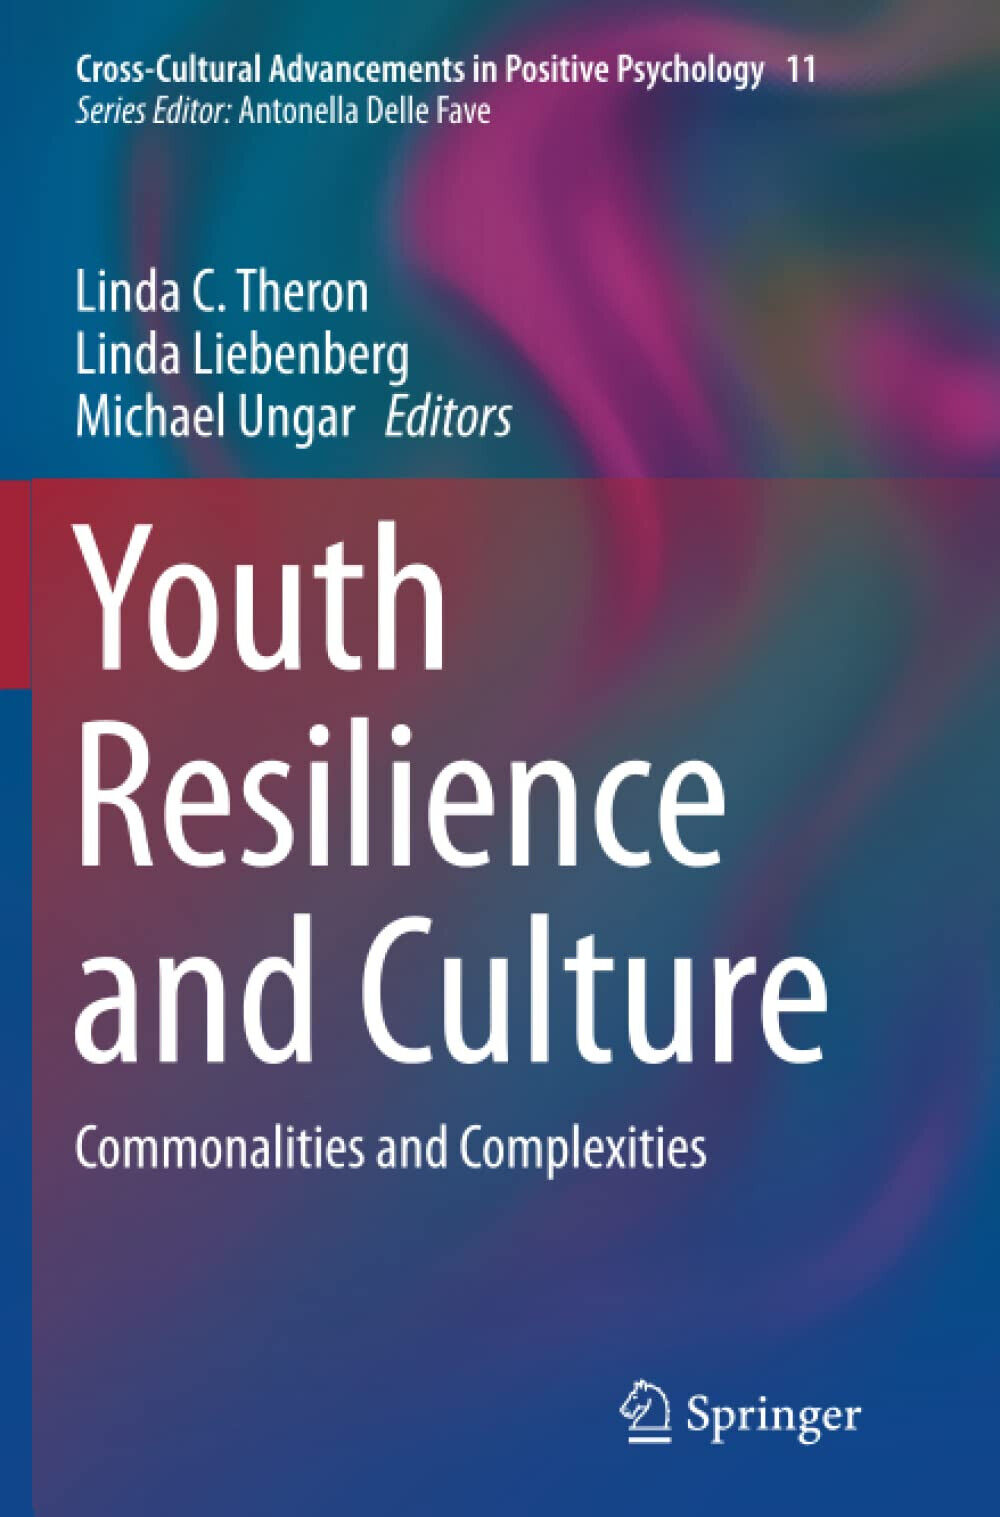 Youth Resilience and Culture - Linda C. Theron - Springer, 2016